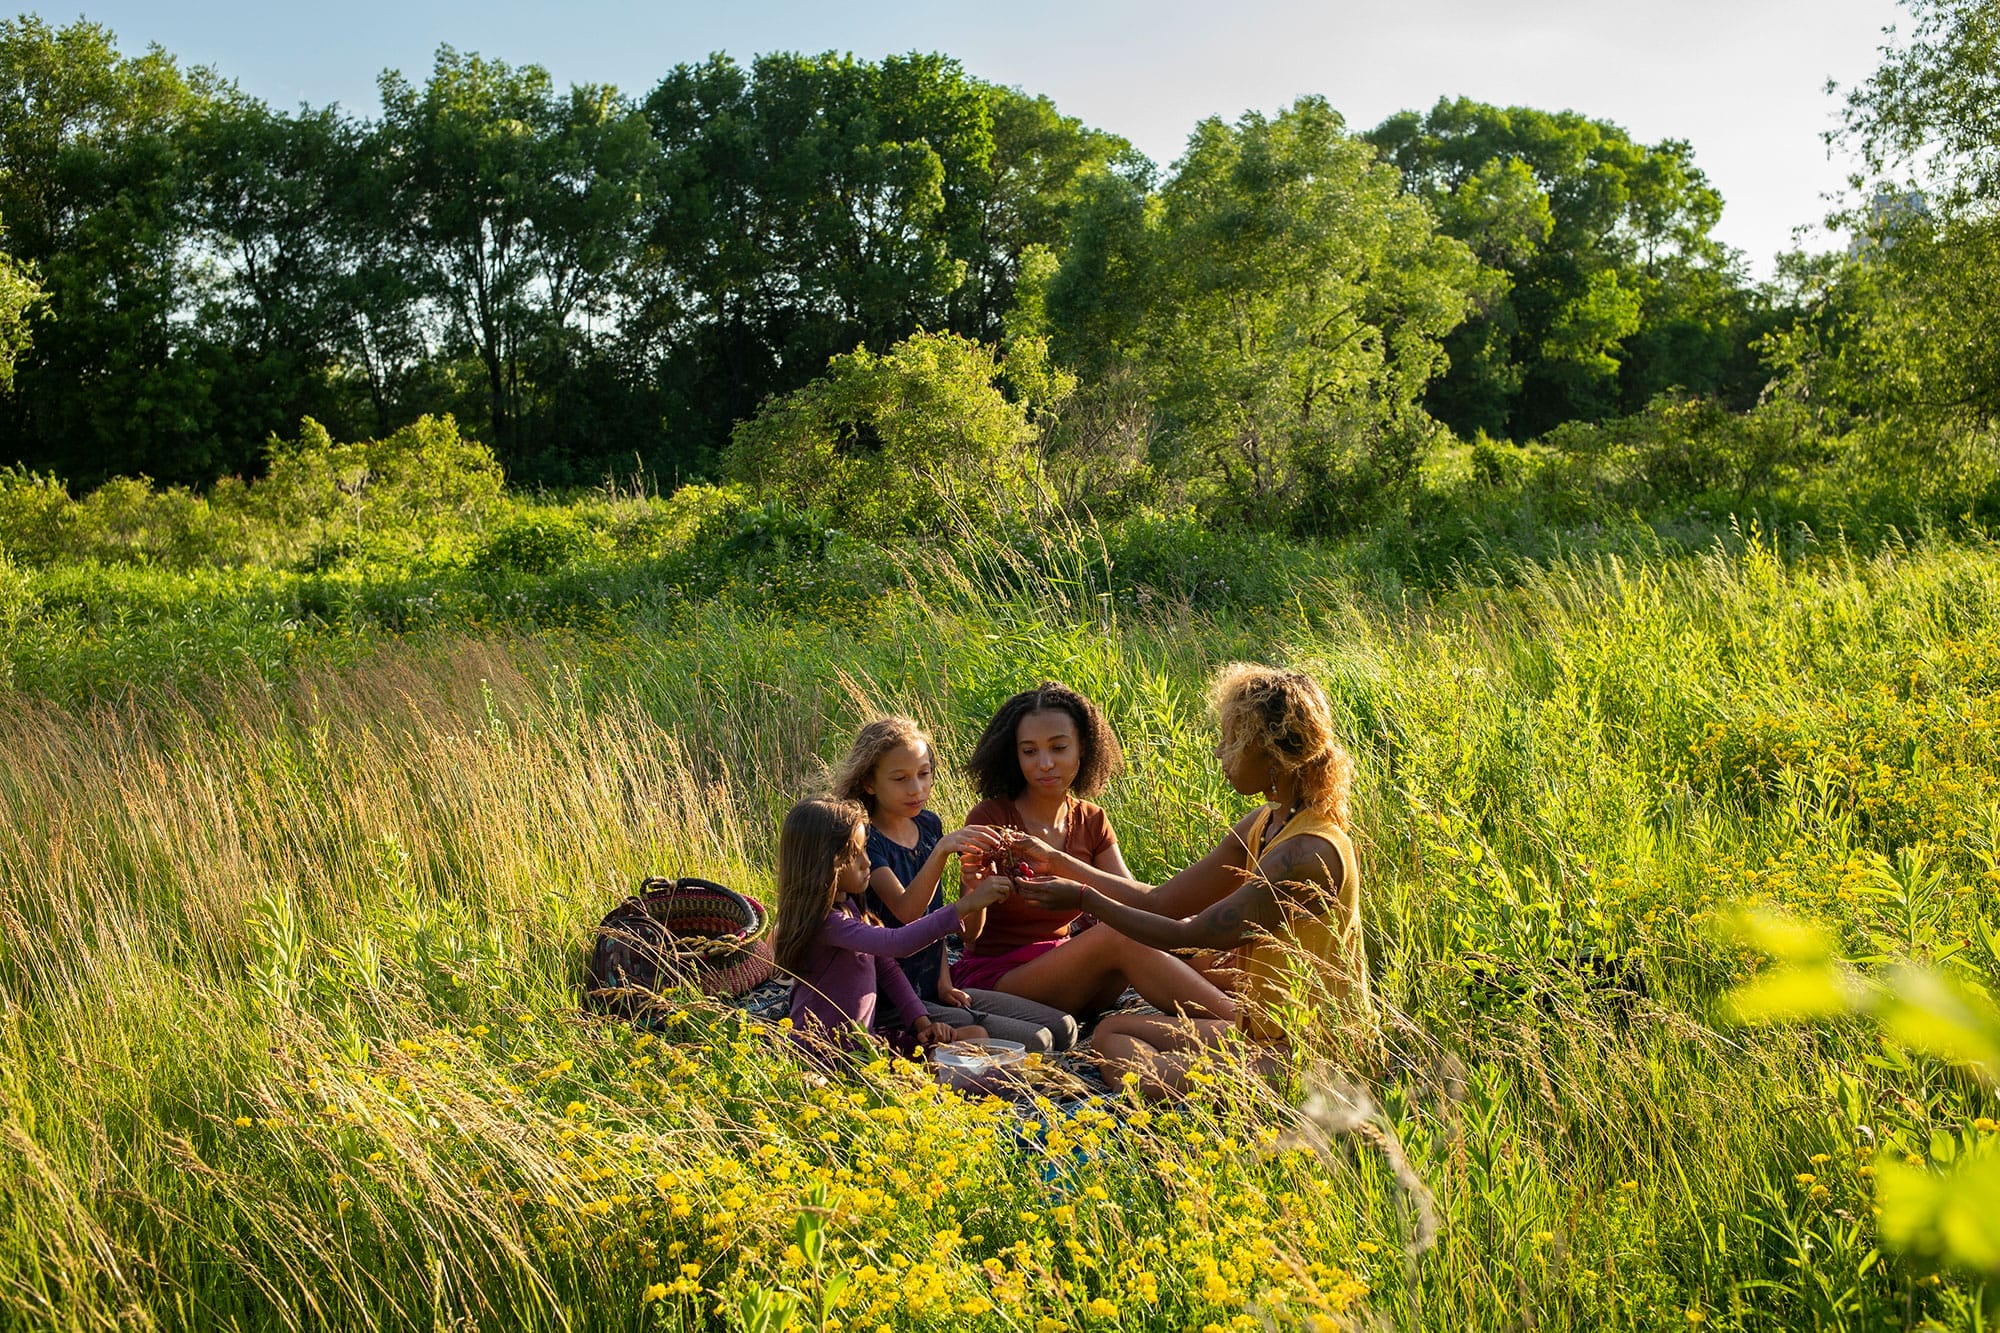 It is no longer enough for cities to create high-quality green spaces. To create strong connections with the community and between residents, parksdepartments must activate those spaces with culturally representative programs.